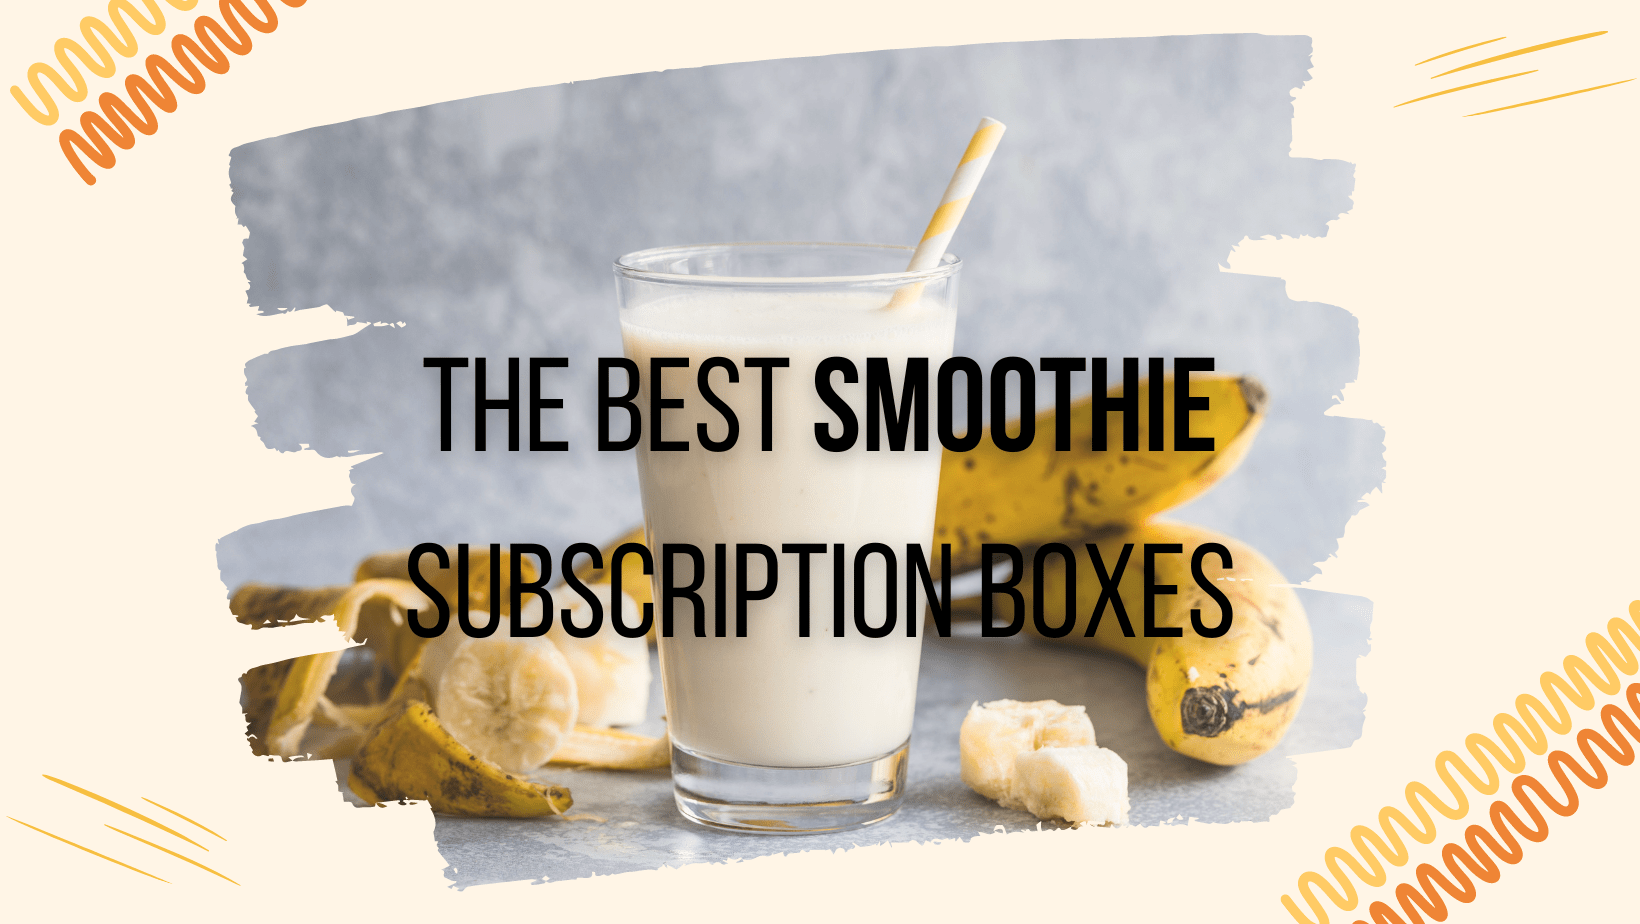 https://hellosubscription.com/wp-content/uploads/2023/03/bestsmoothie.png?quality=90&strip=all